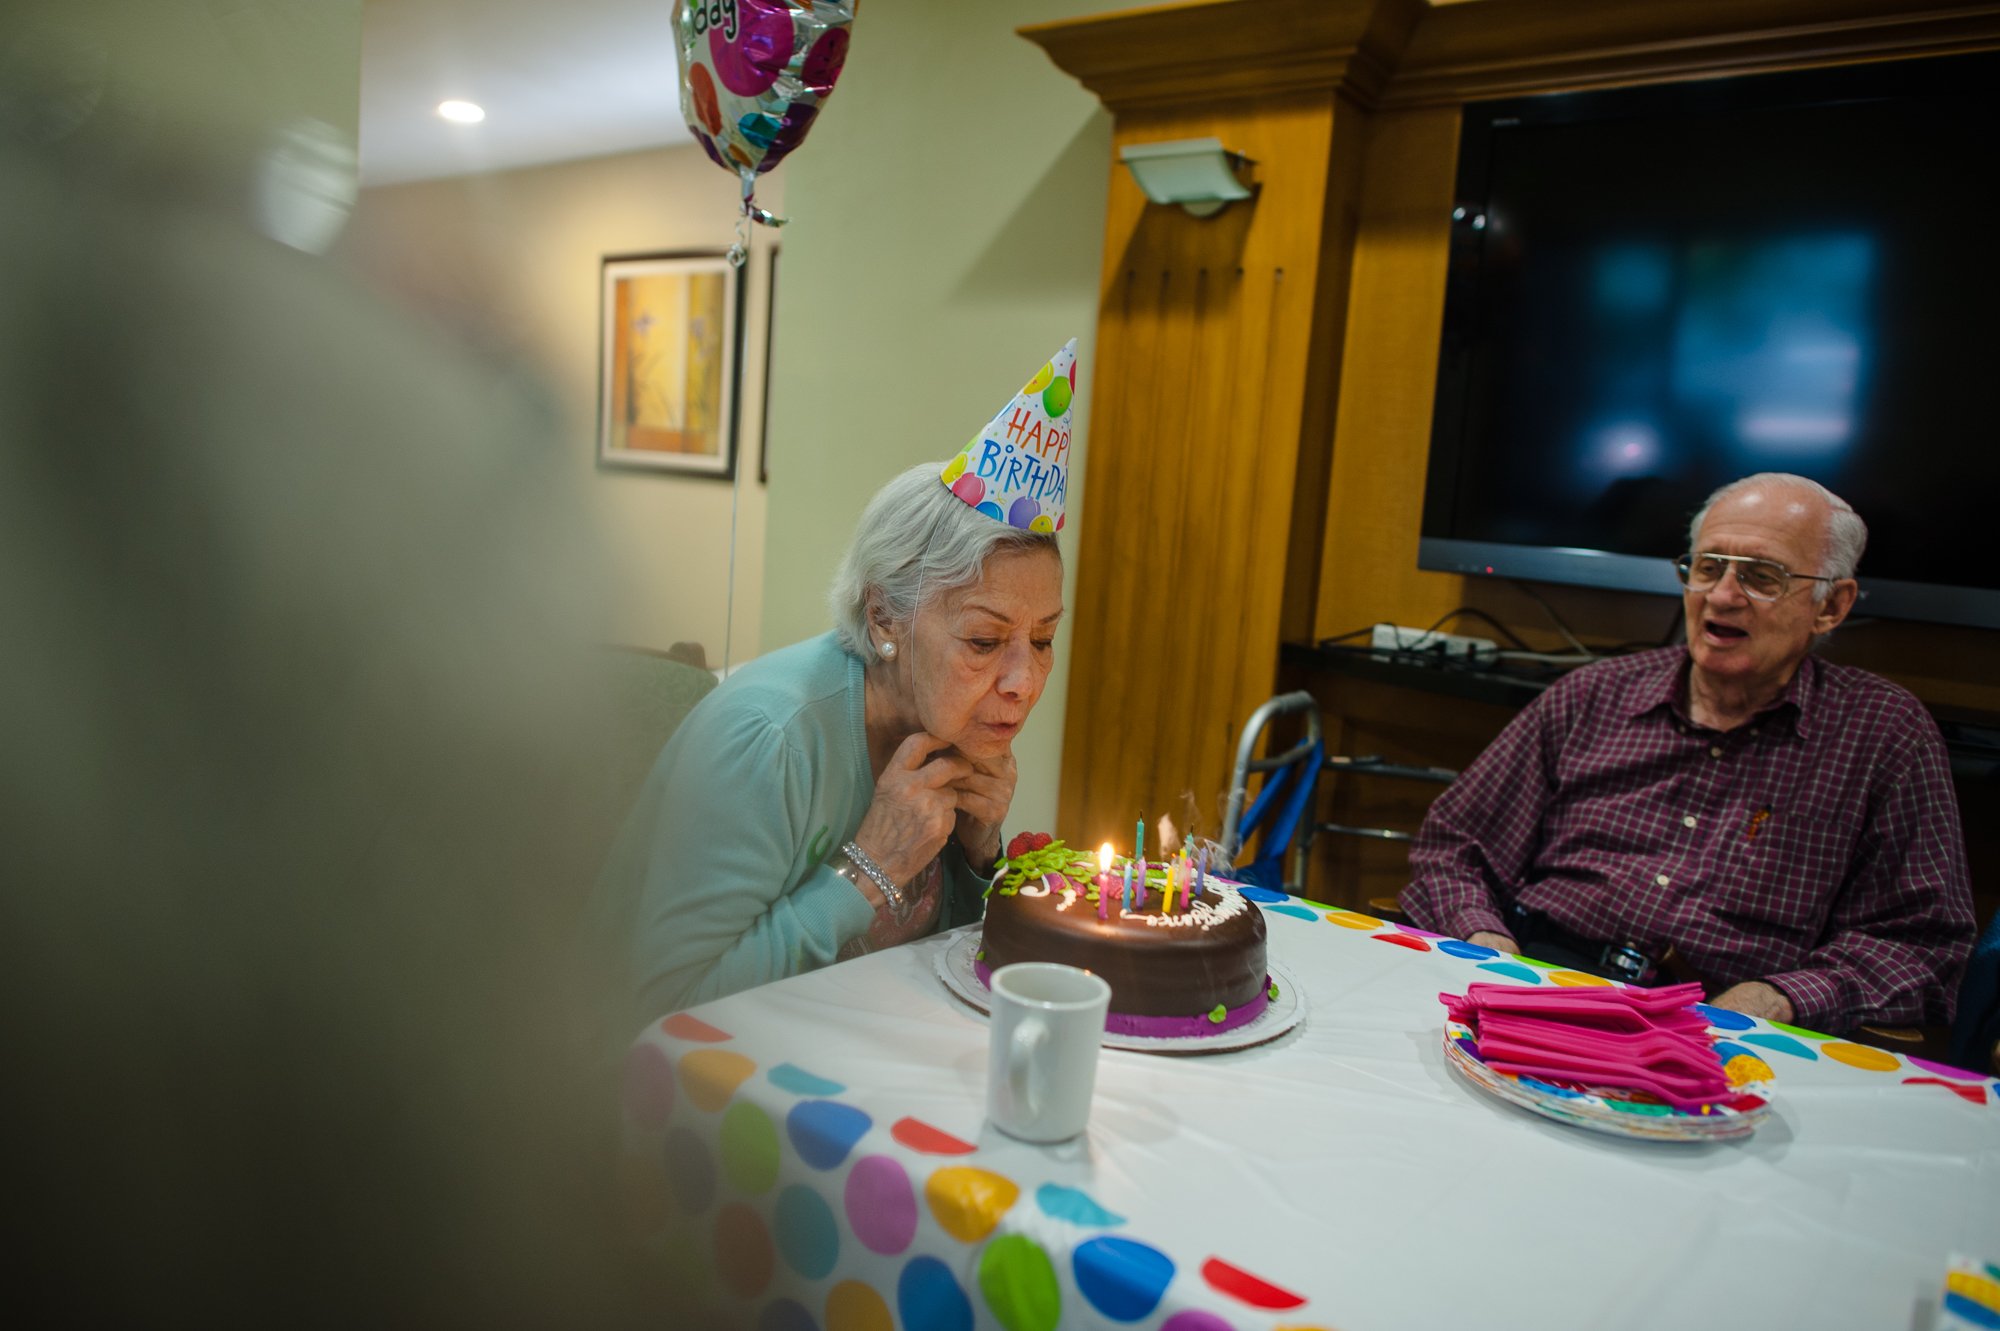  Bianca, age 87, blows out her candles, 2012.  